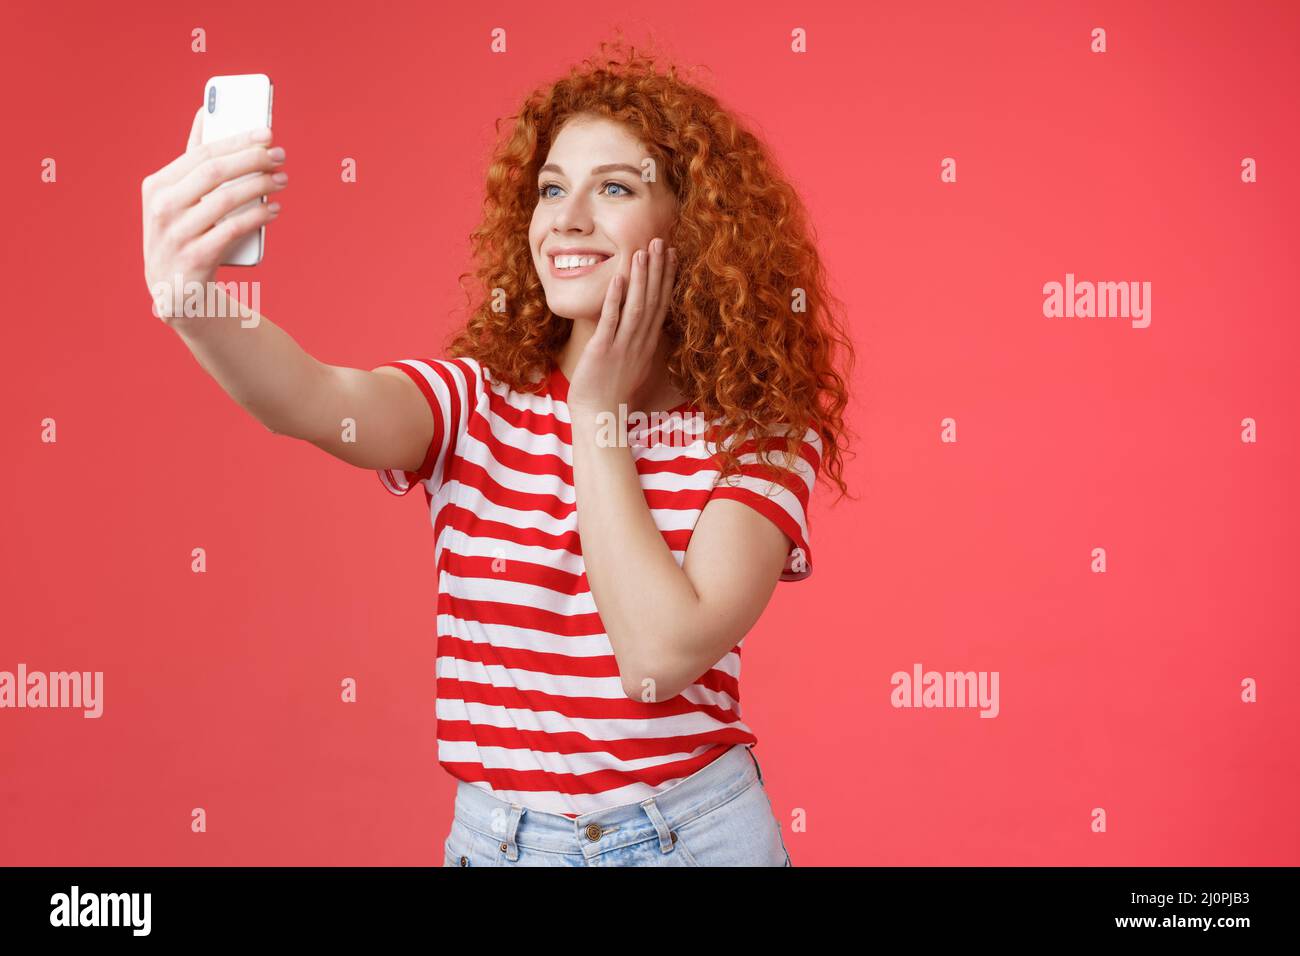 Stylish social media female popular lifestyle blogger adore taking photos herself extend arm hold smartphone posing silly cute s Stock Photo